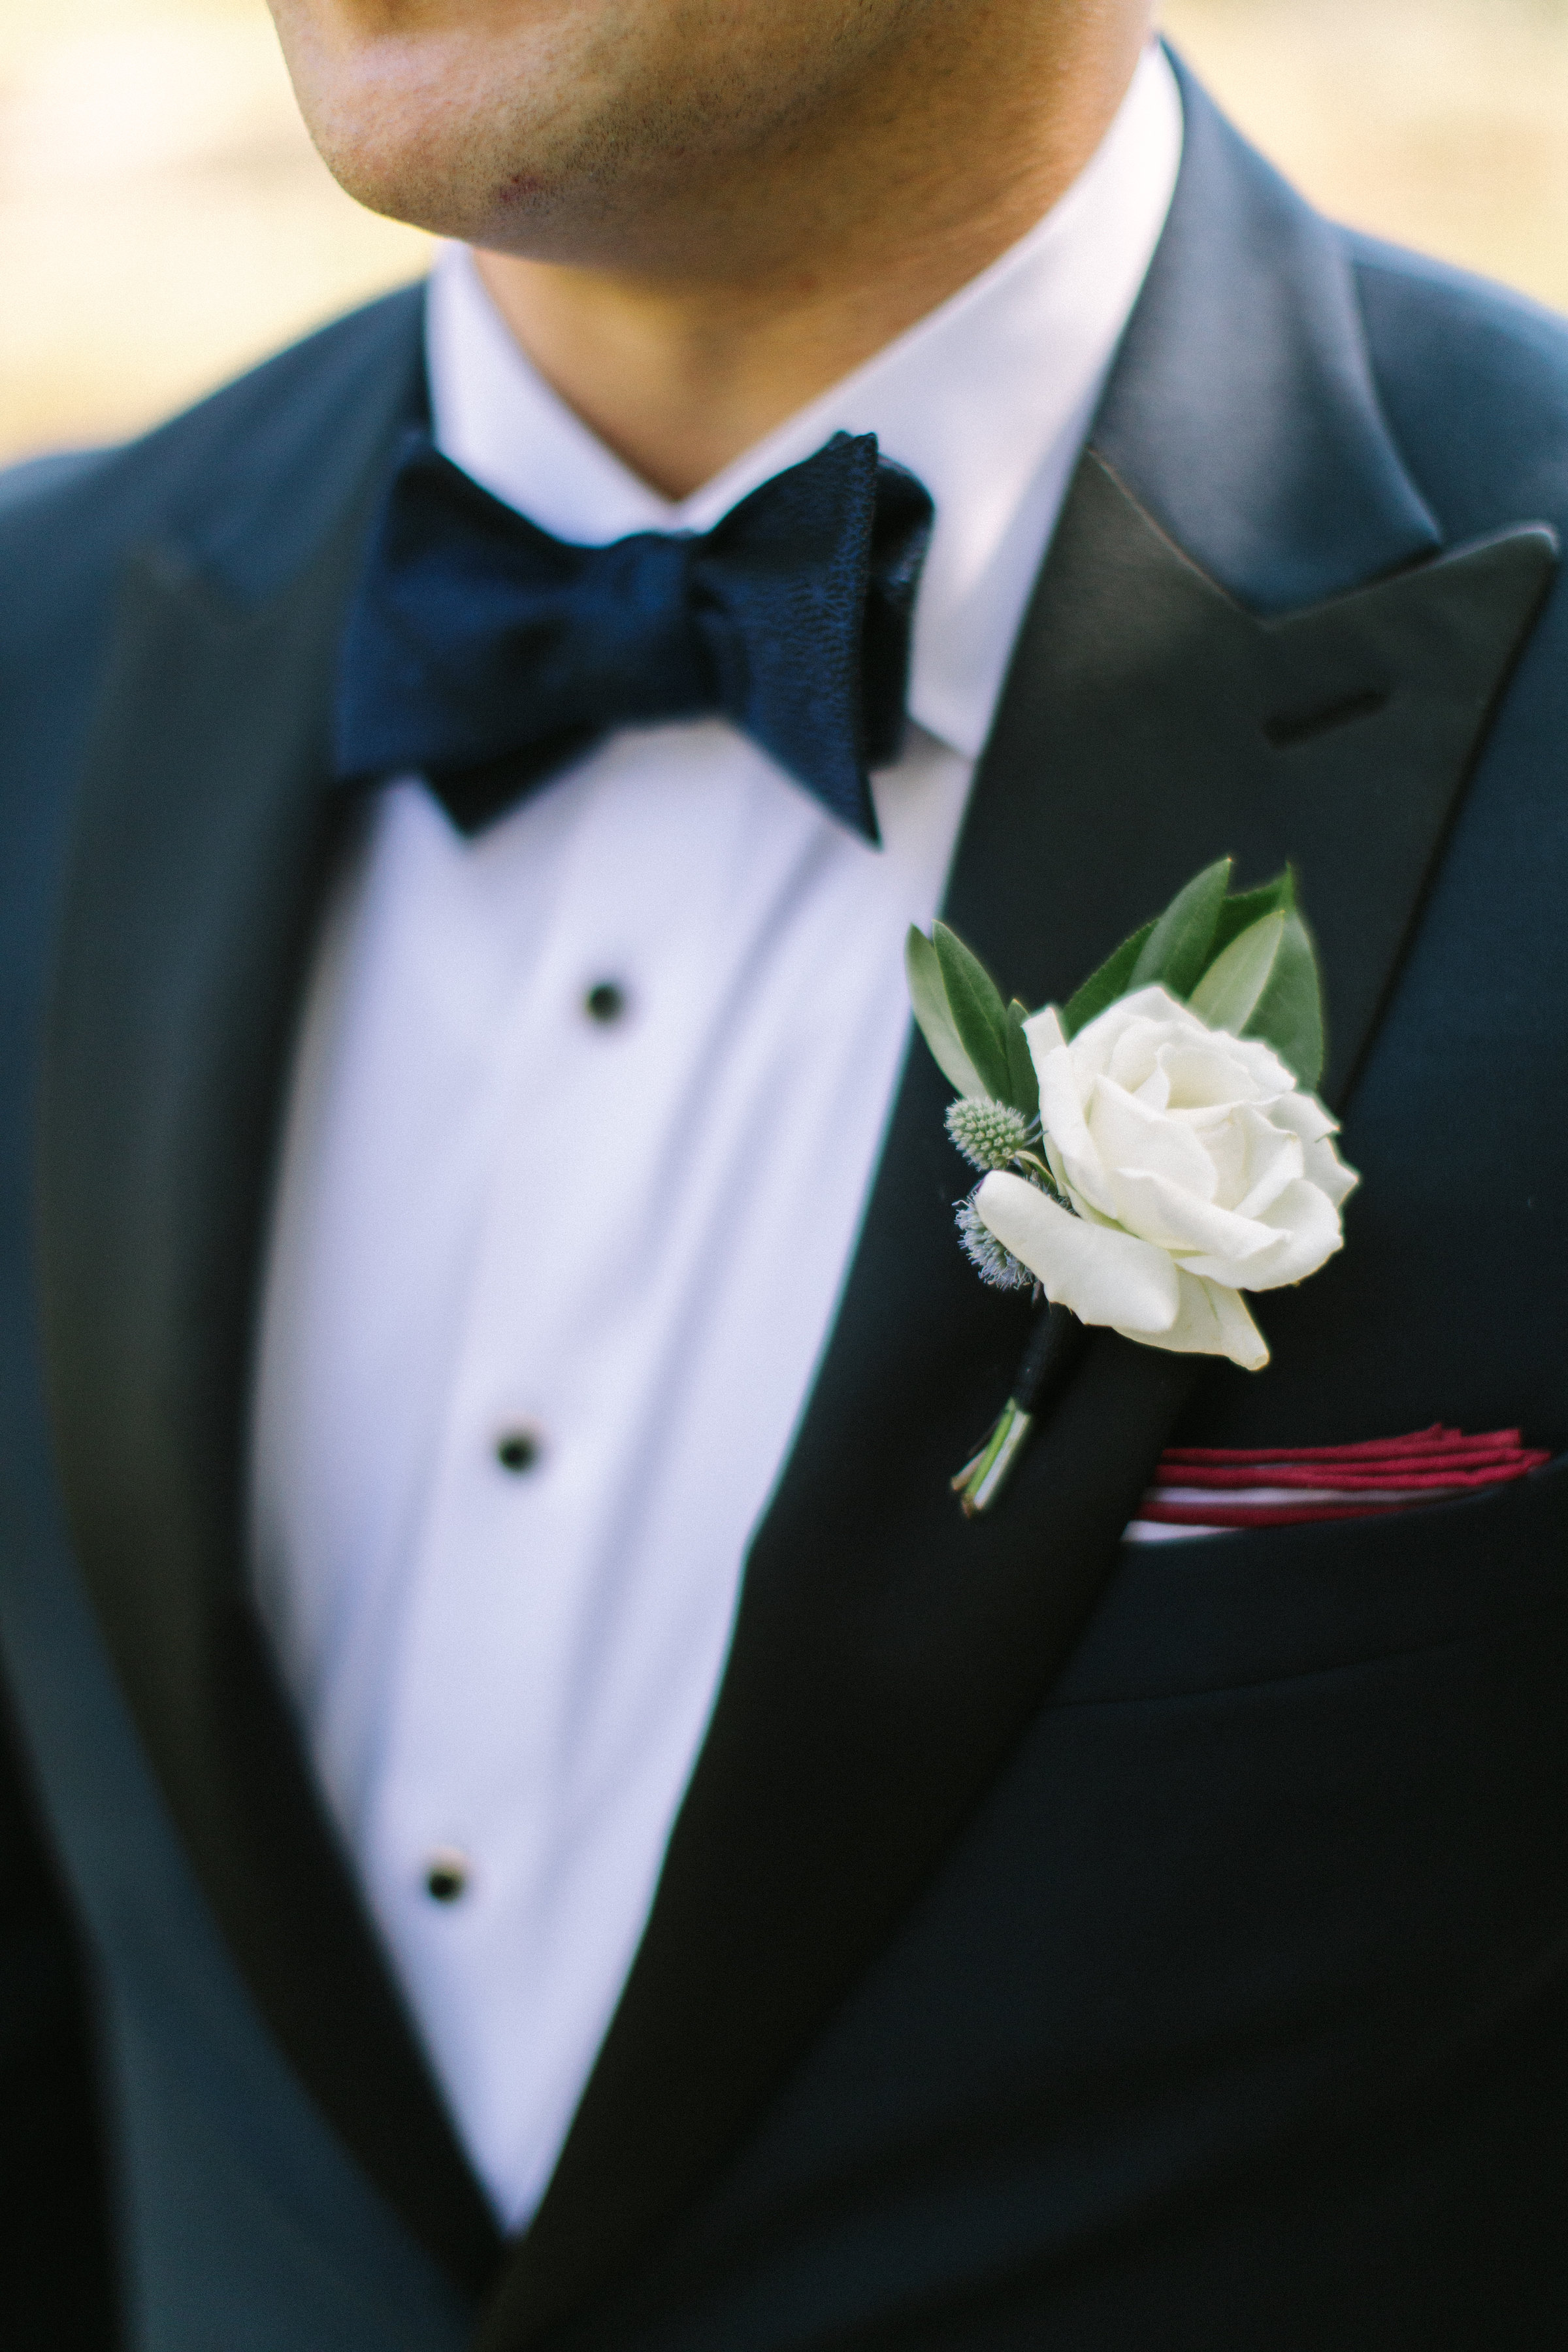 Groom with classic white rose boutonniere with ruby pocket square and bowtie.